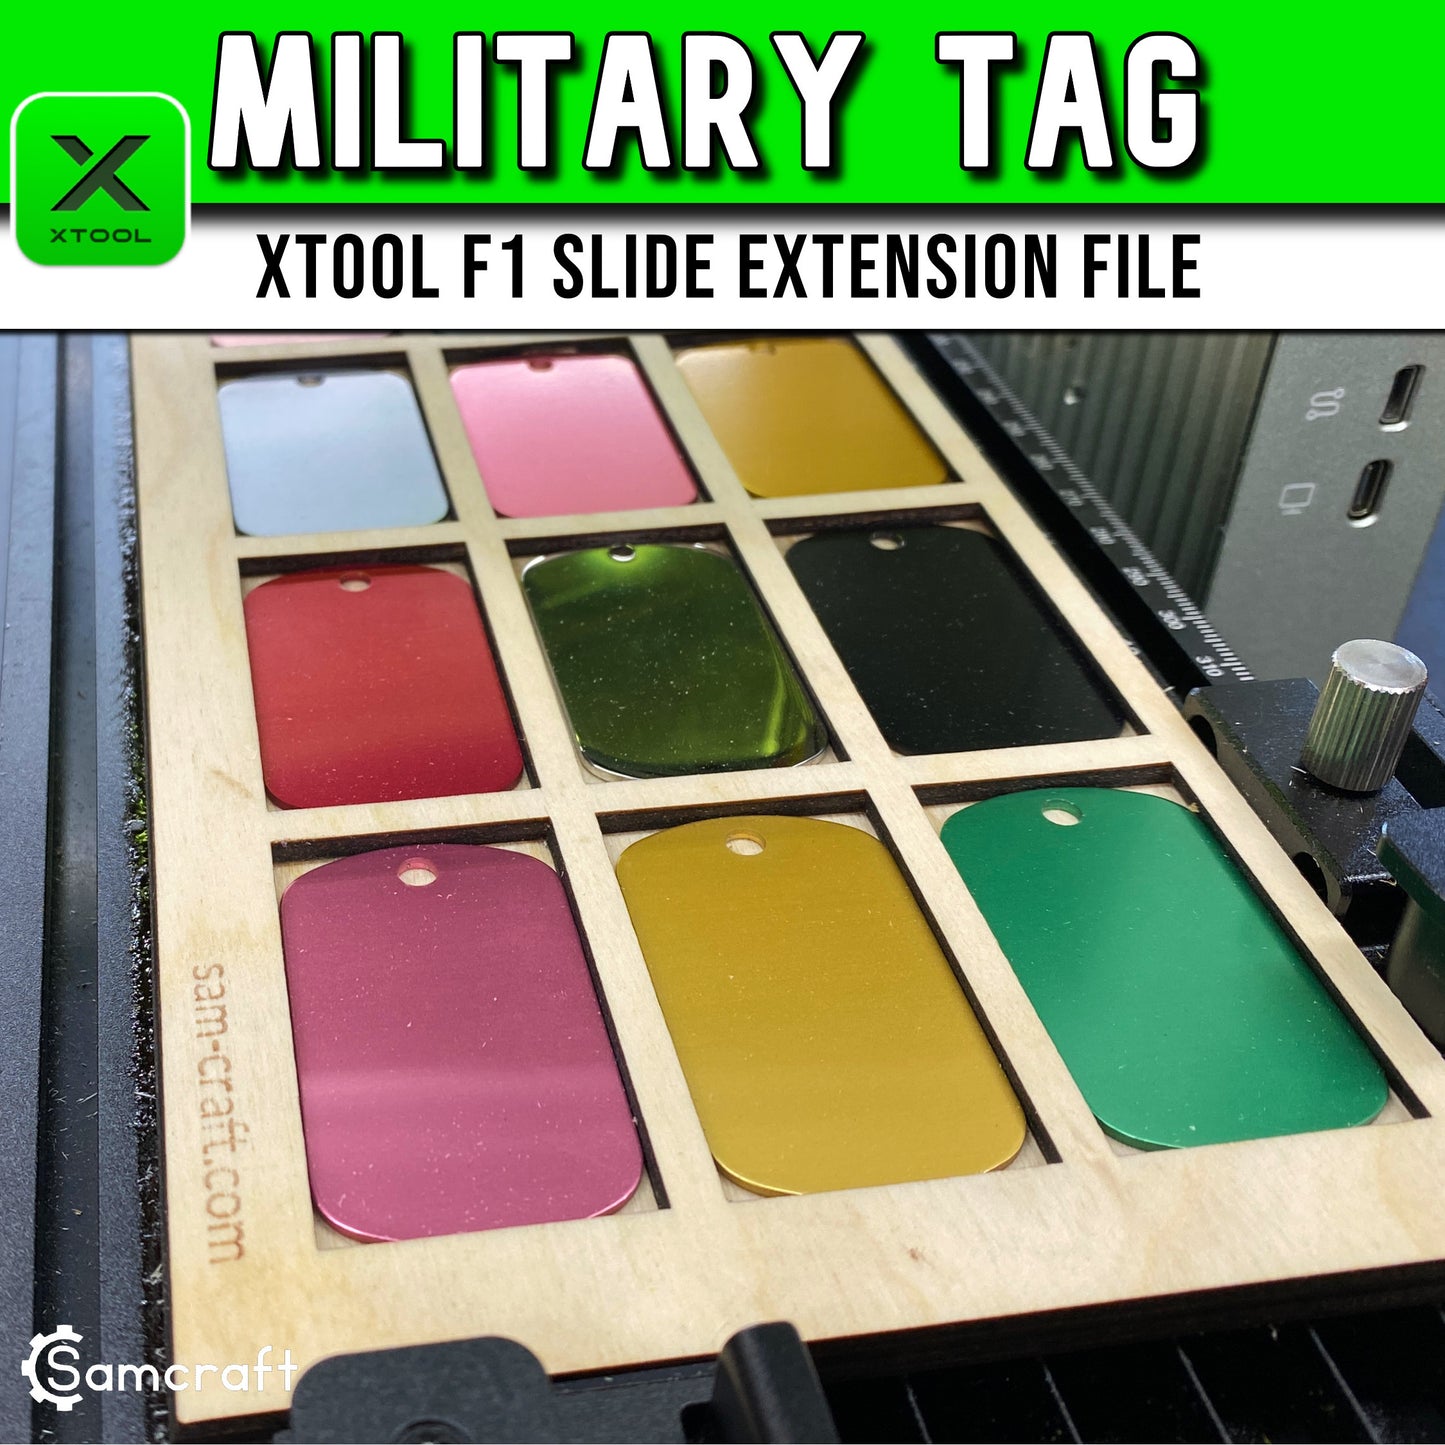 Military Dog Tag Template - xTool F1 Slide Extension